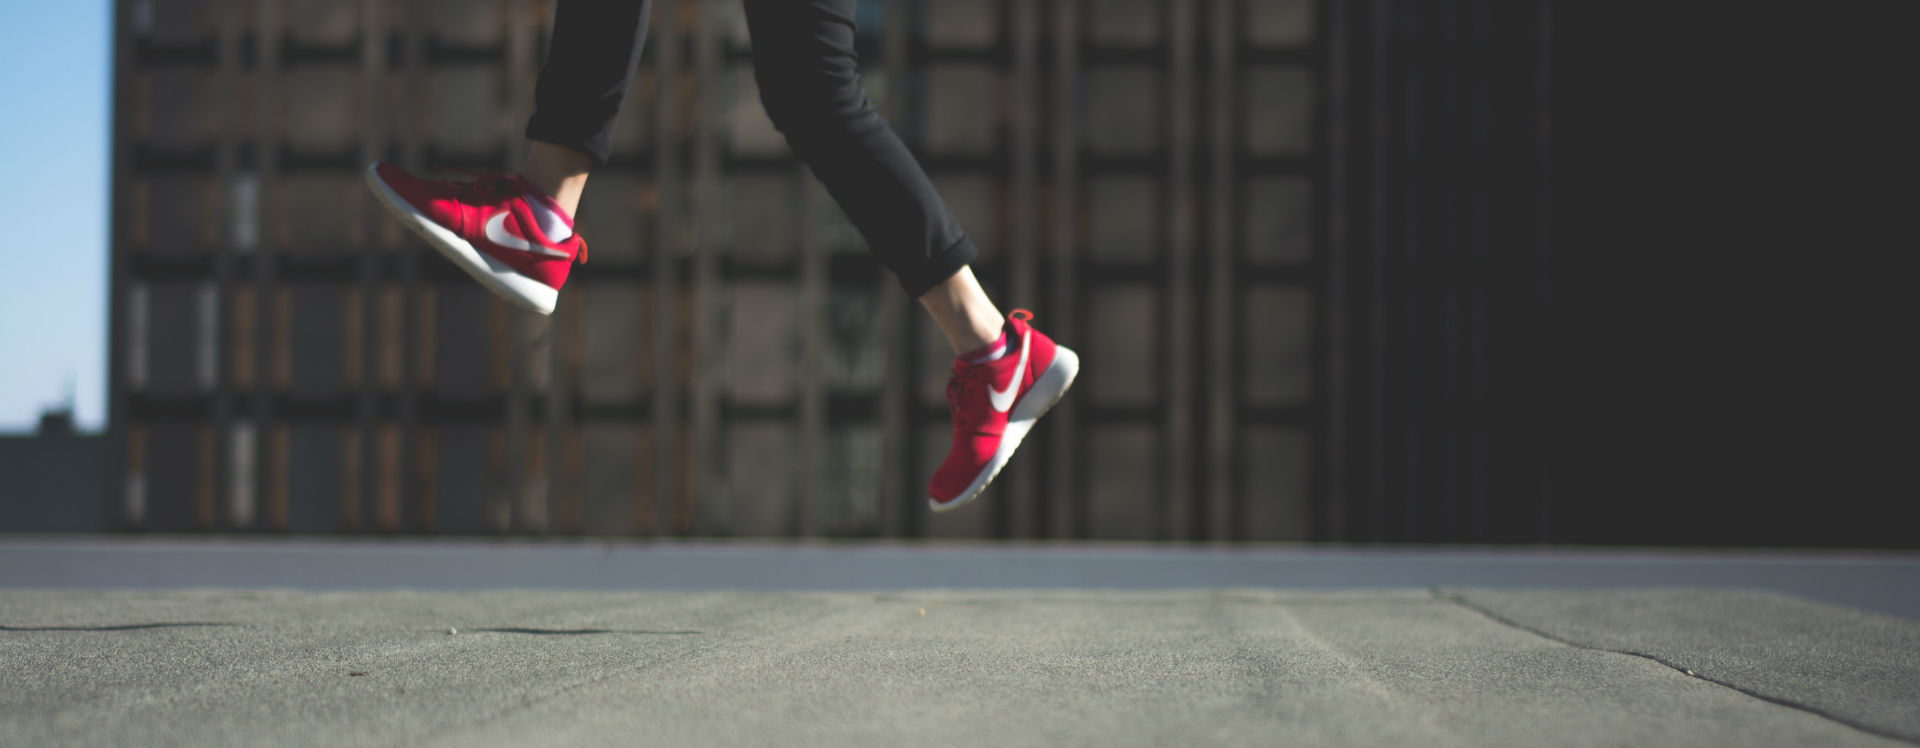 A person wearing bright red gym shoes jumping in the air.